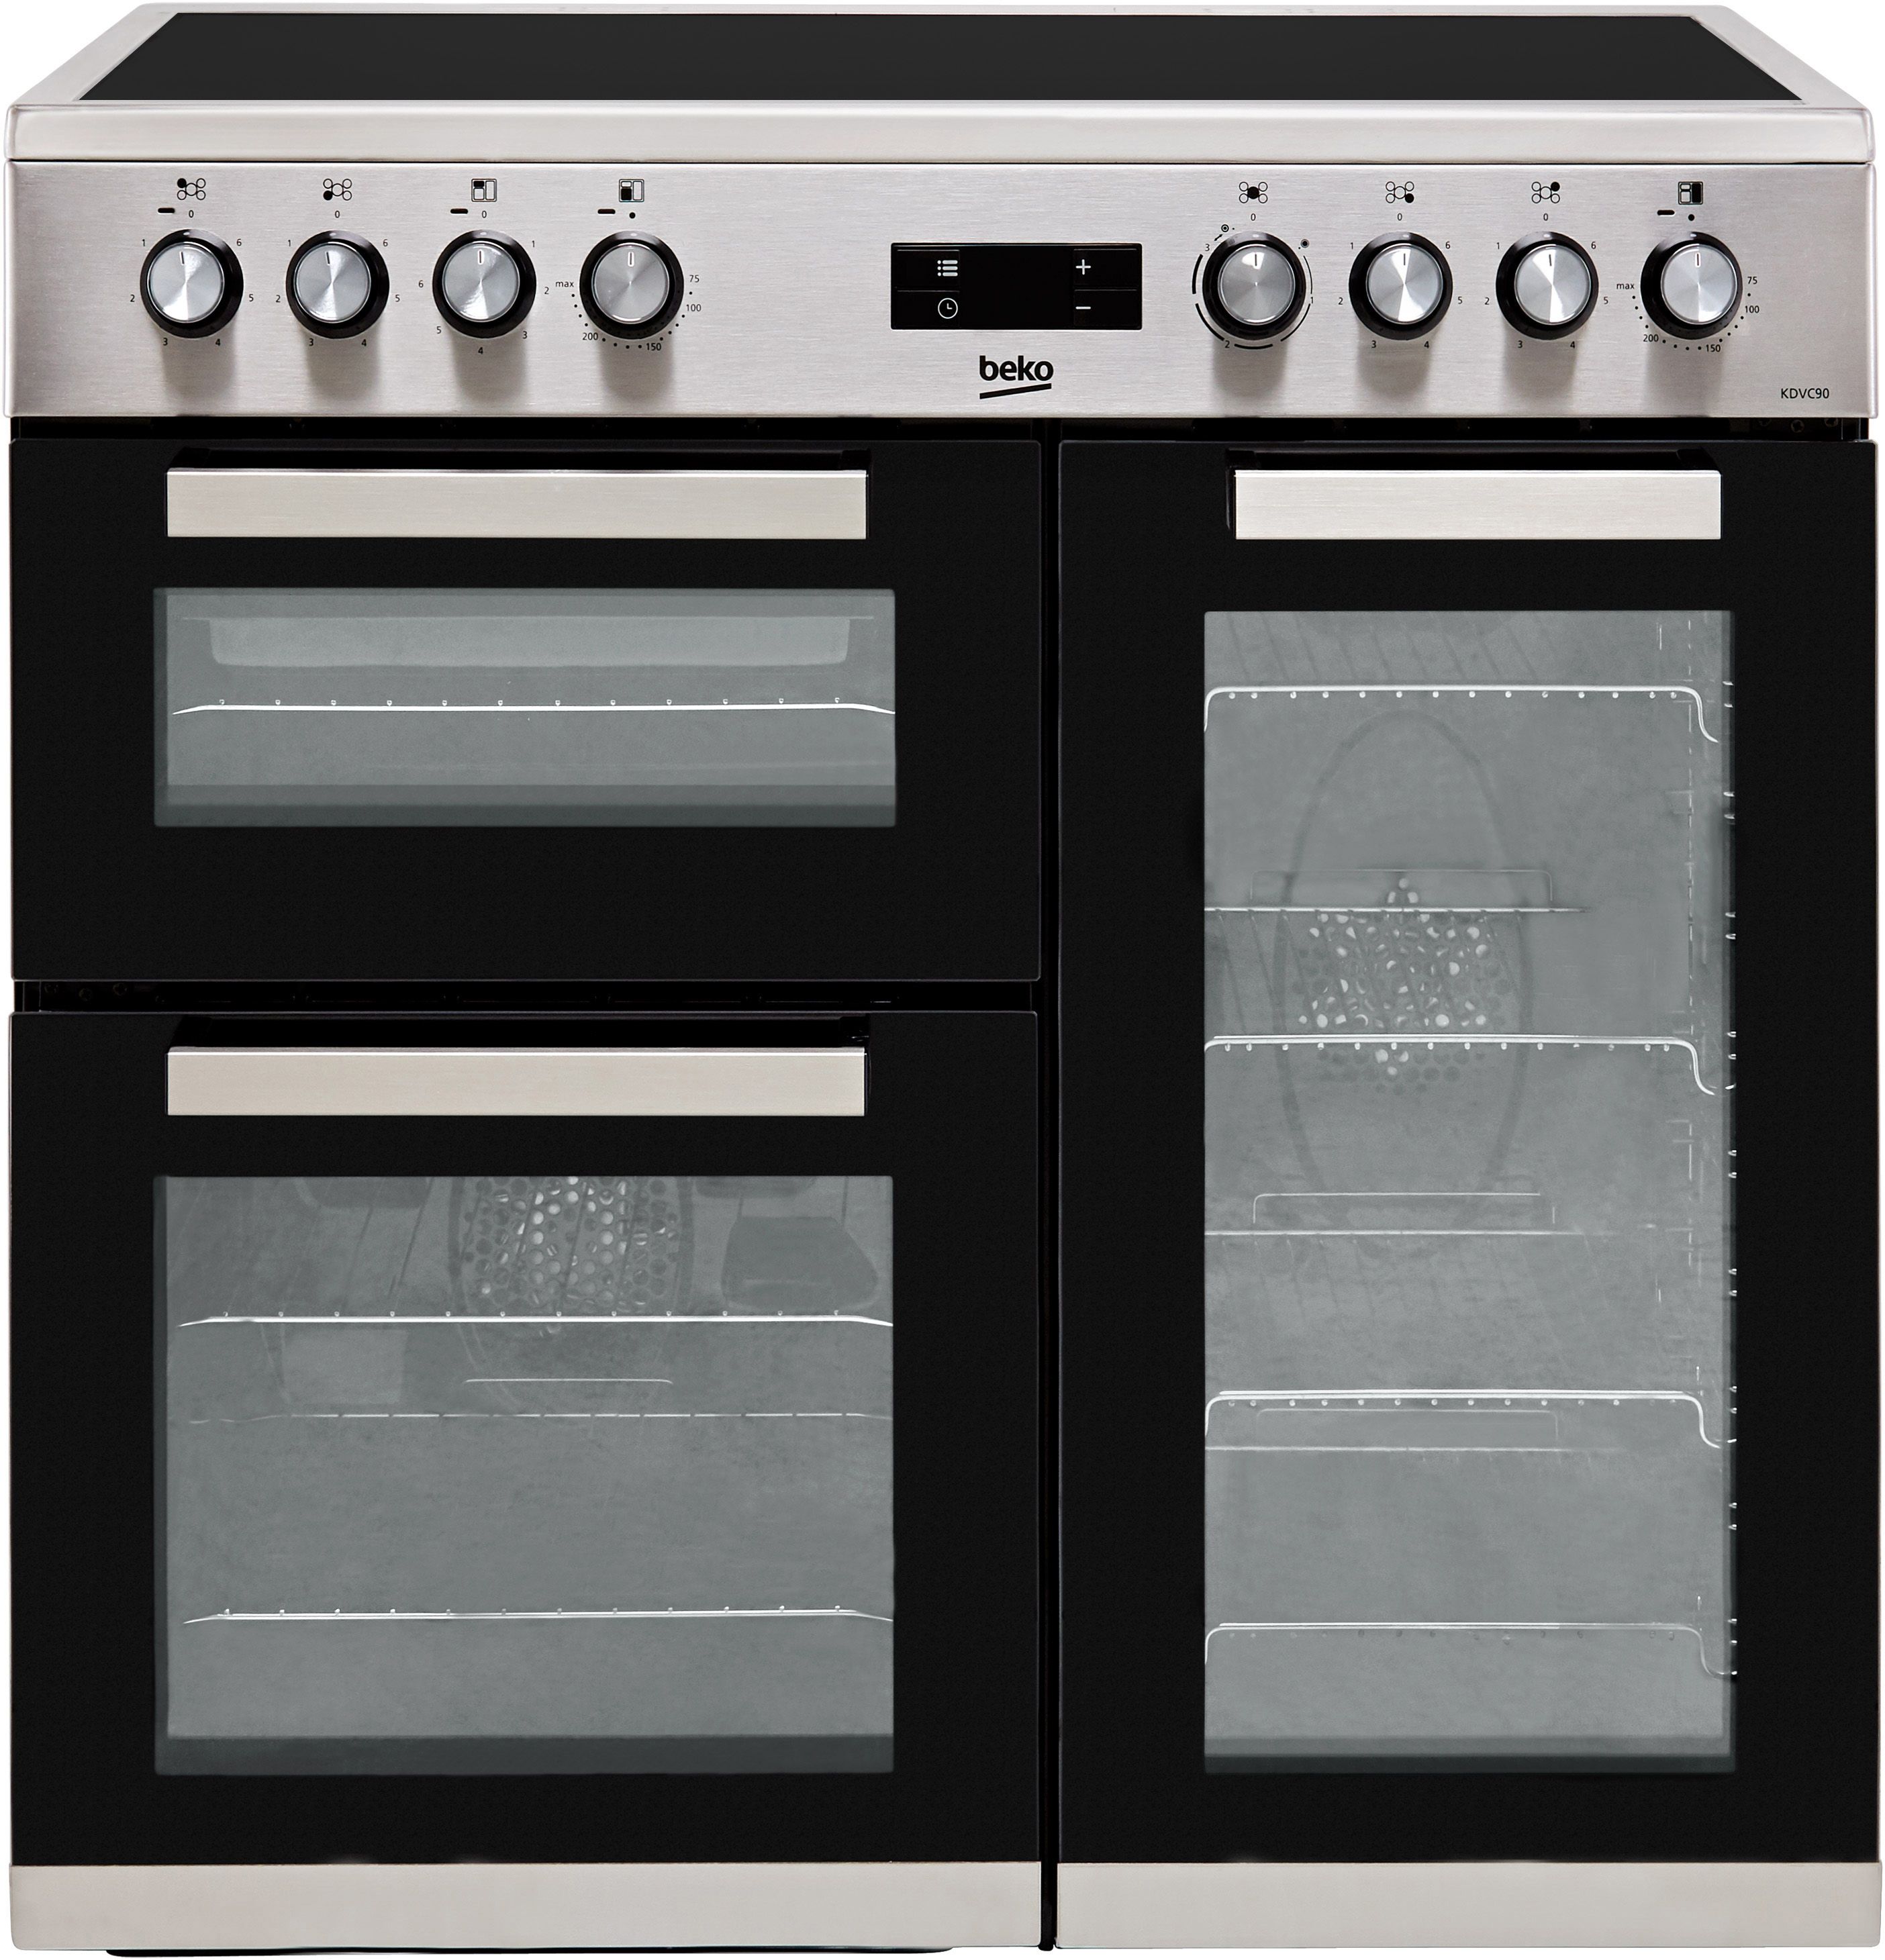 Beko KDVC90X 90cm Electric Range Cooker with Ceramic Hob - Stainless Steel - A/A Rated, Stainless Steel